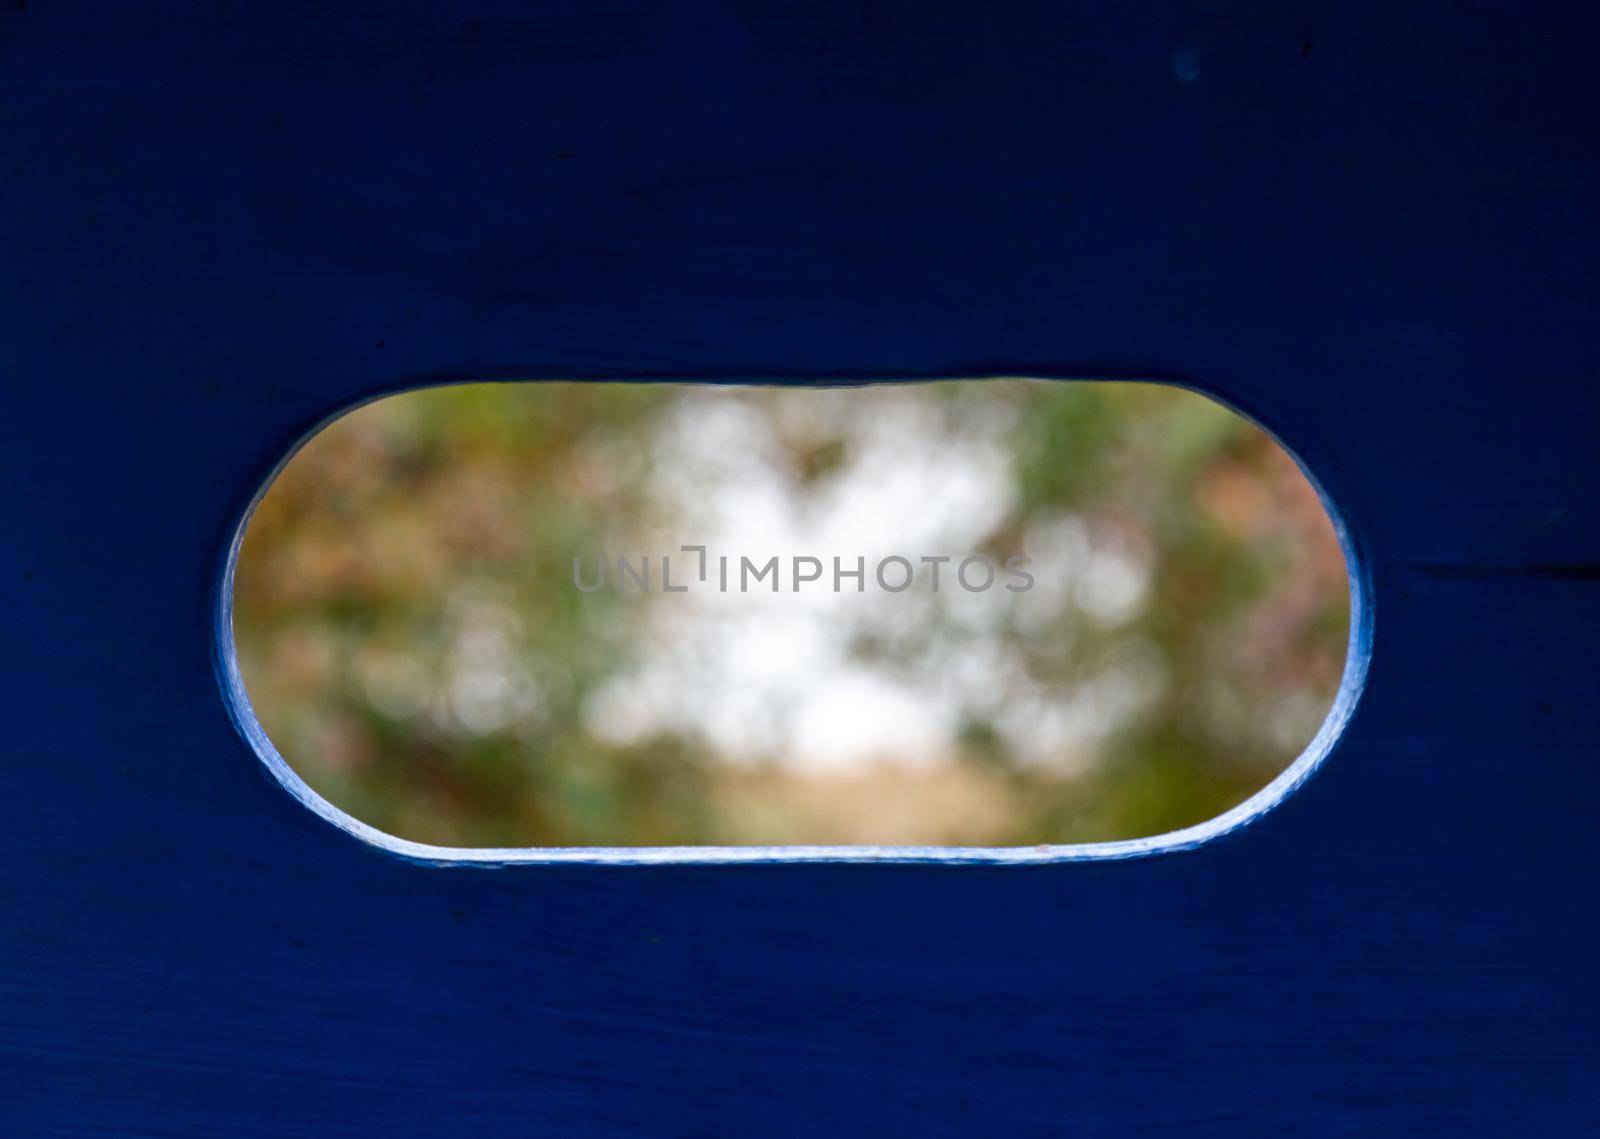 Blured Landscape, view of trees in the park through an oval hole in a blue wooden wall